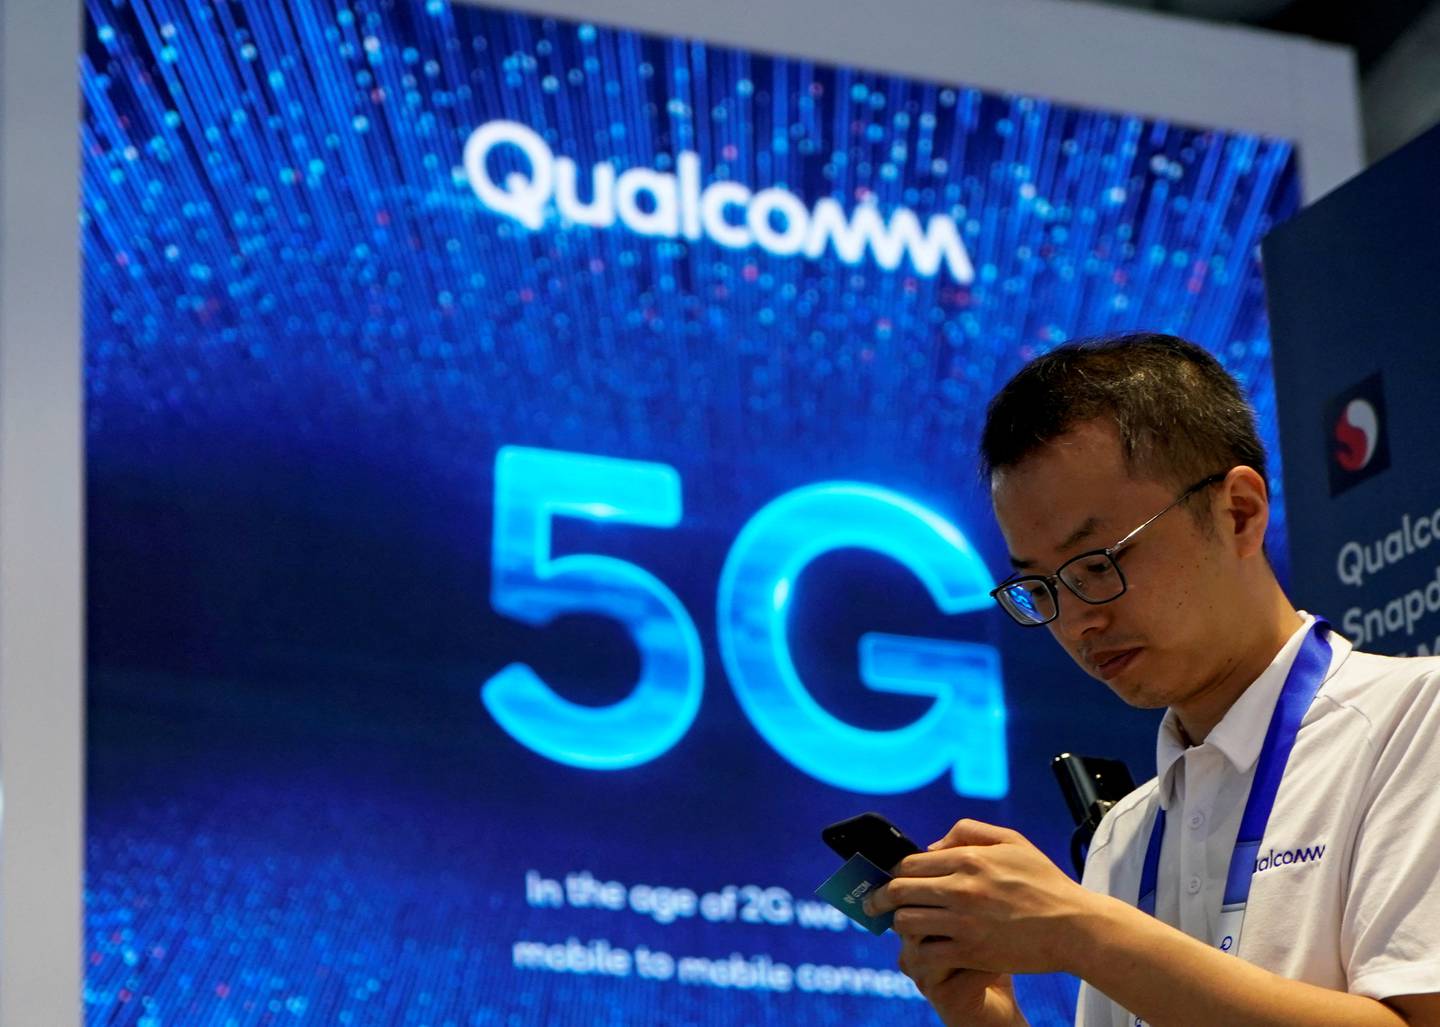 Qualcomm and 5G signs at Mobile World Congress in Shanghai.  Reuters